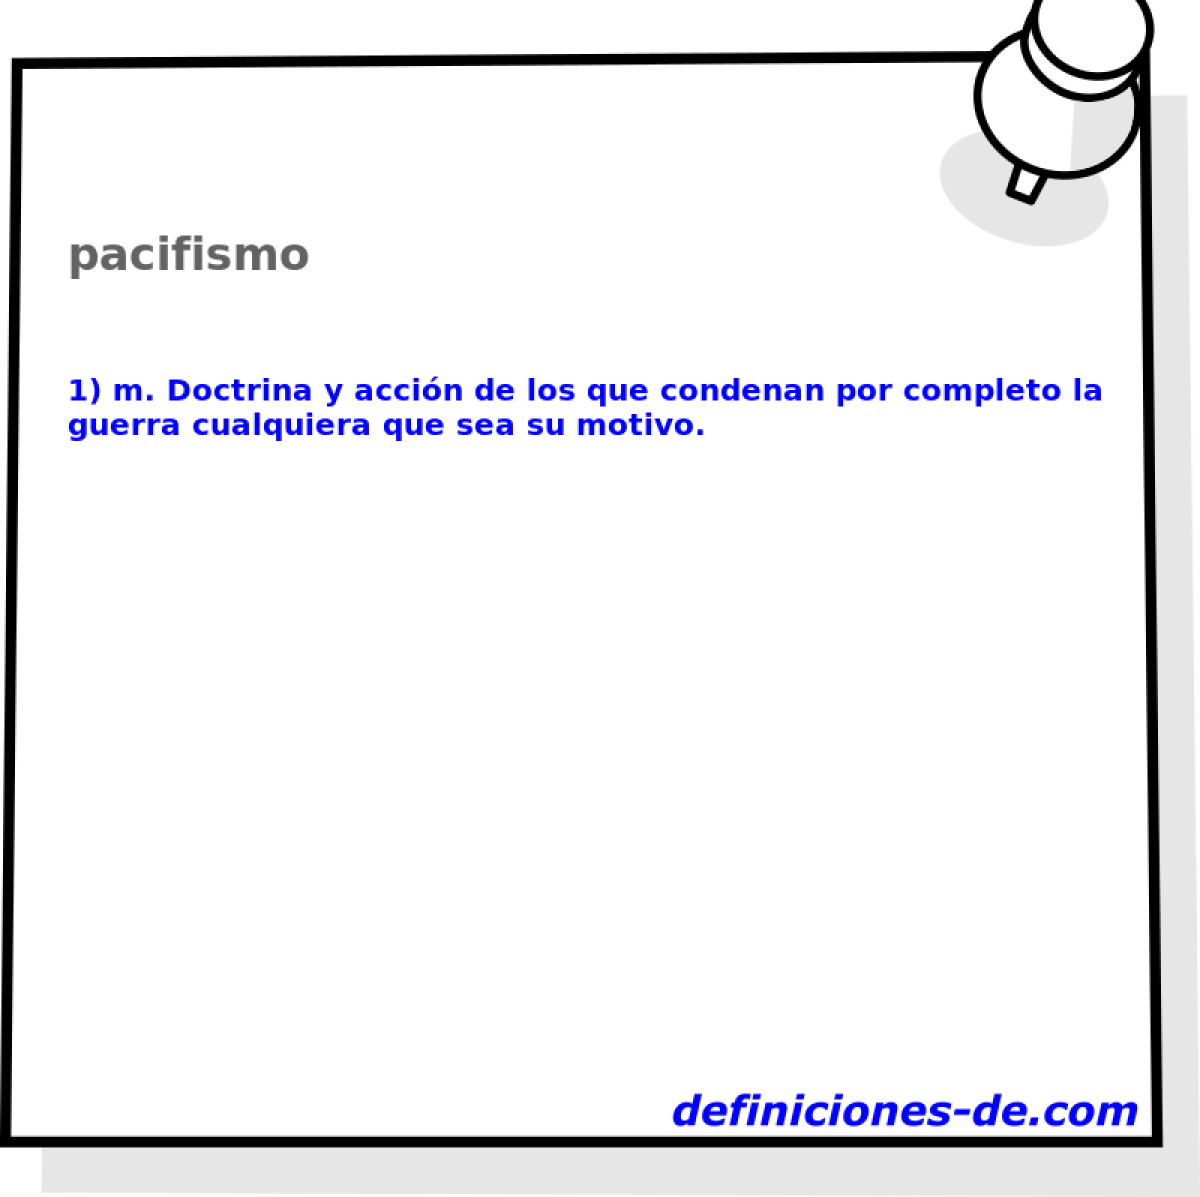 pacifismo 